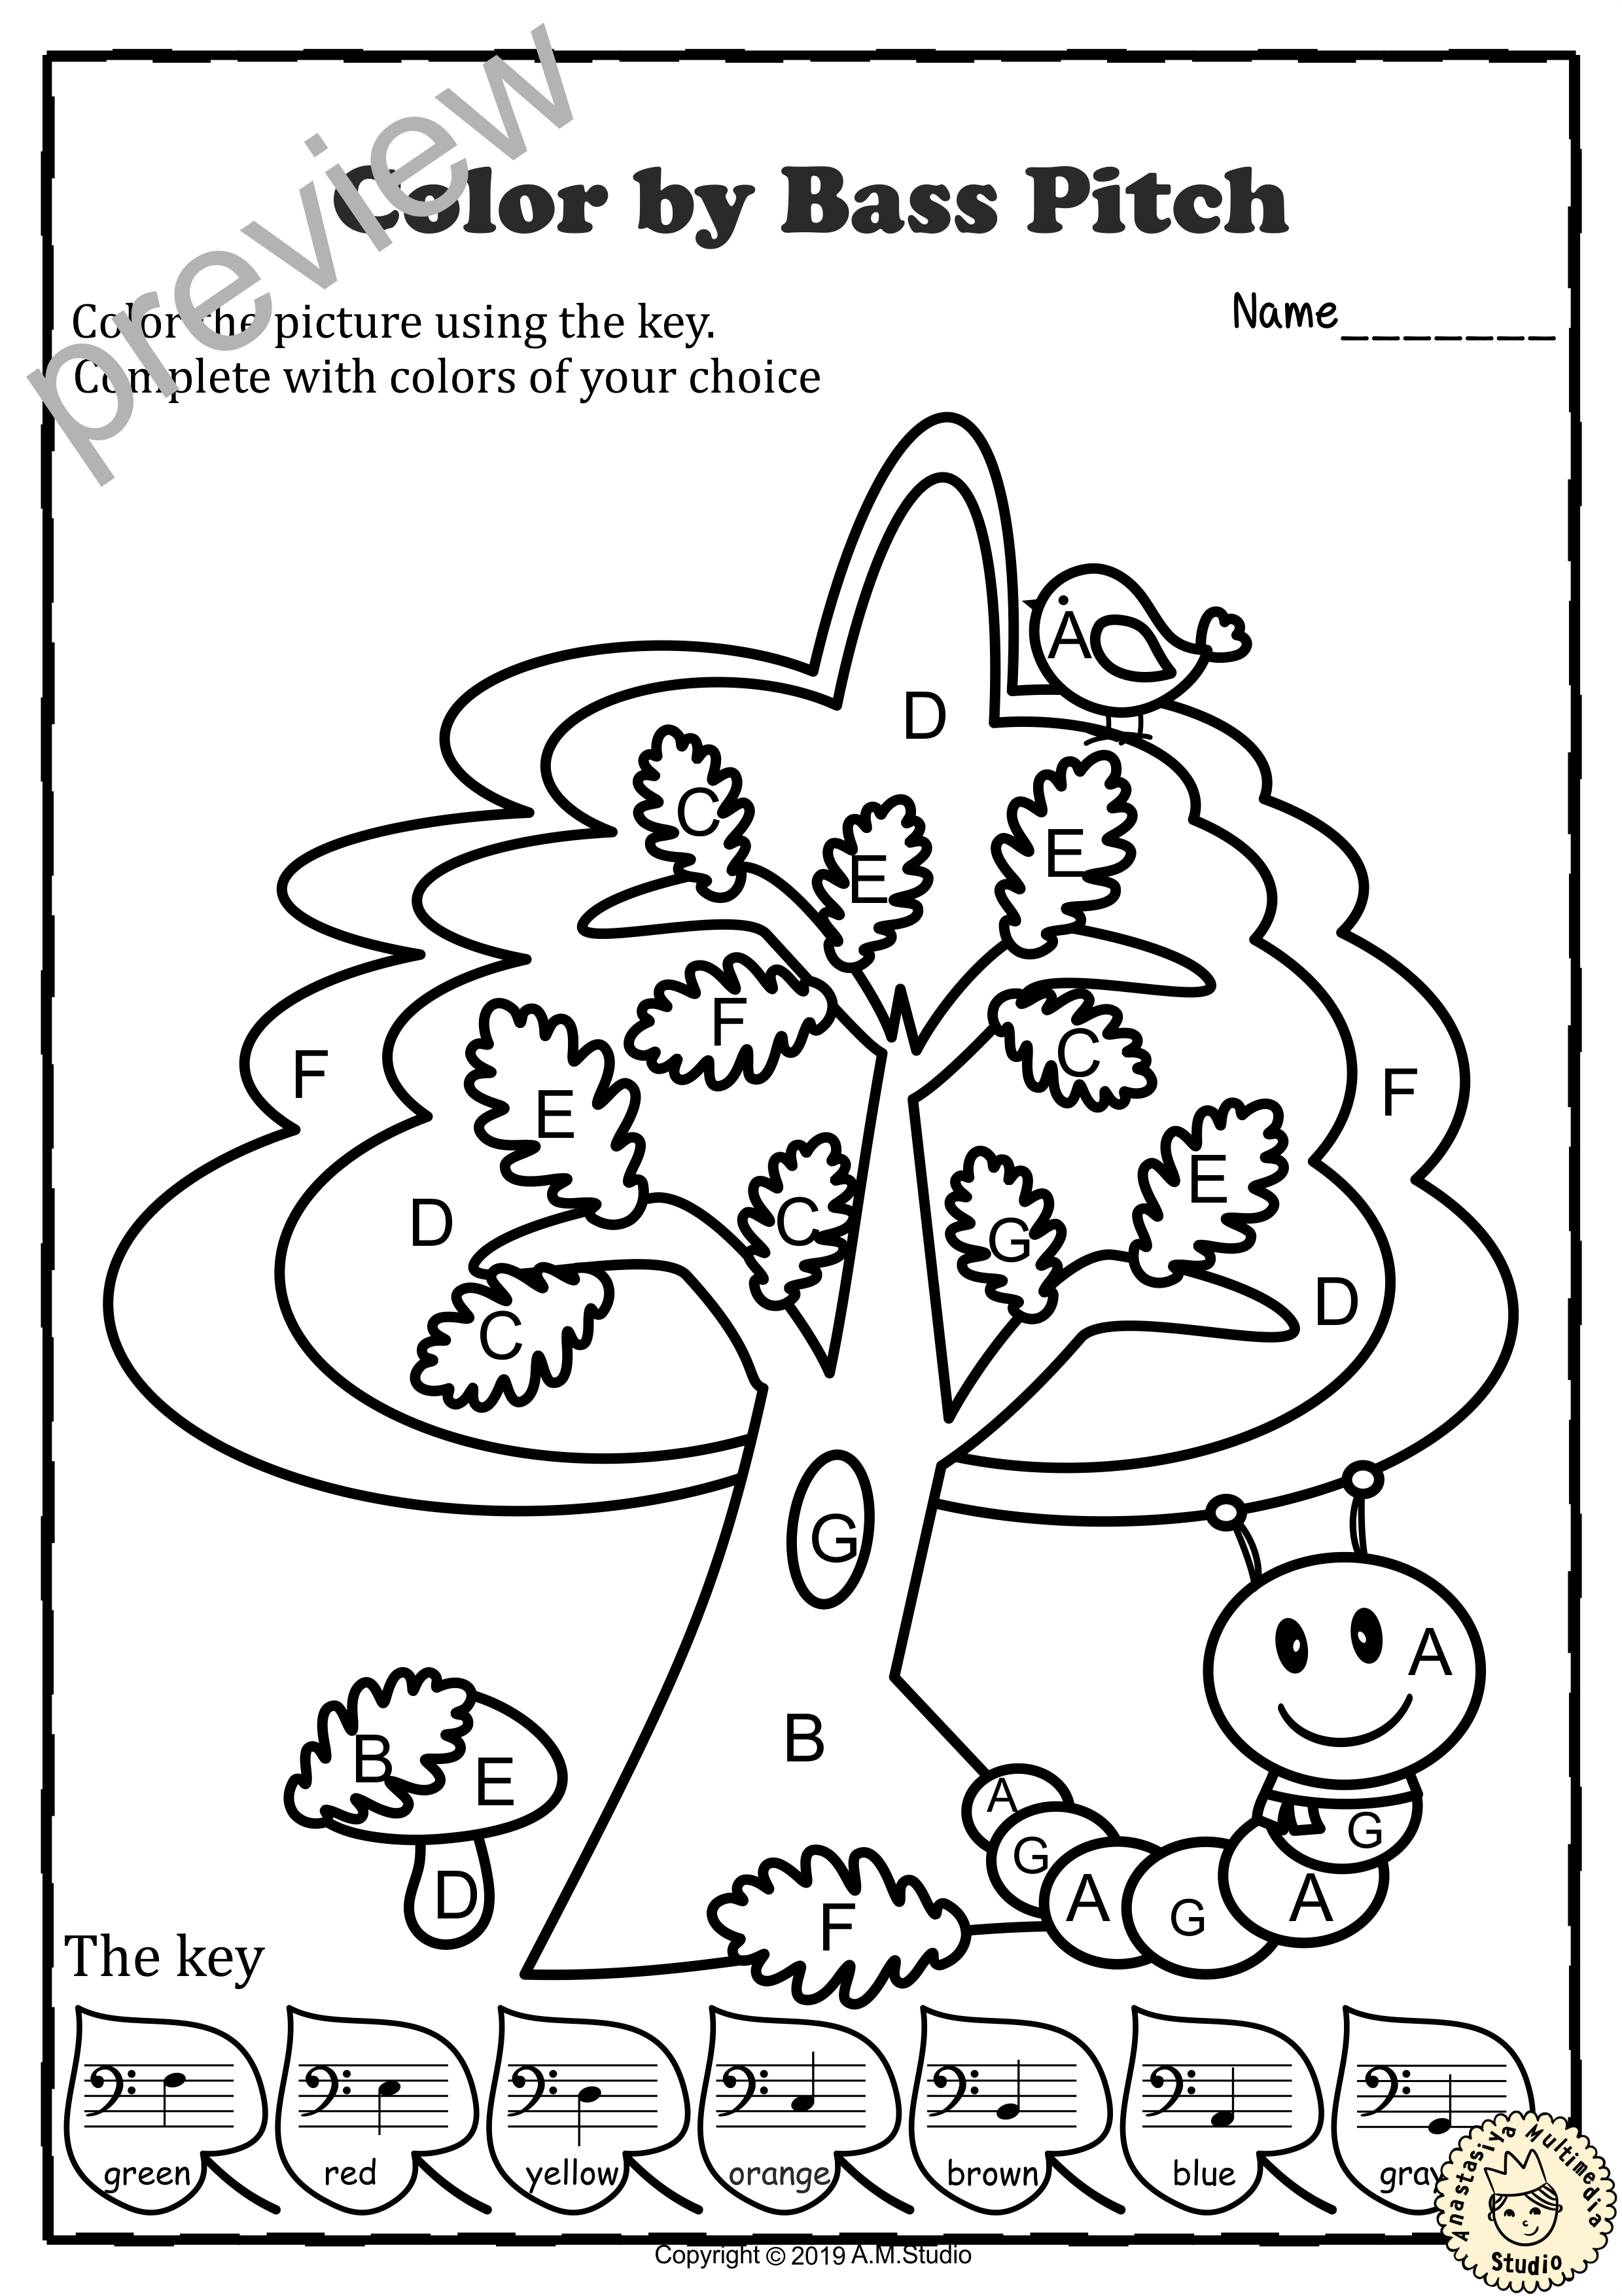 Musical Coloring Pages for Fall {Color by Bass Pitch} with answers (img # 2)